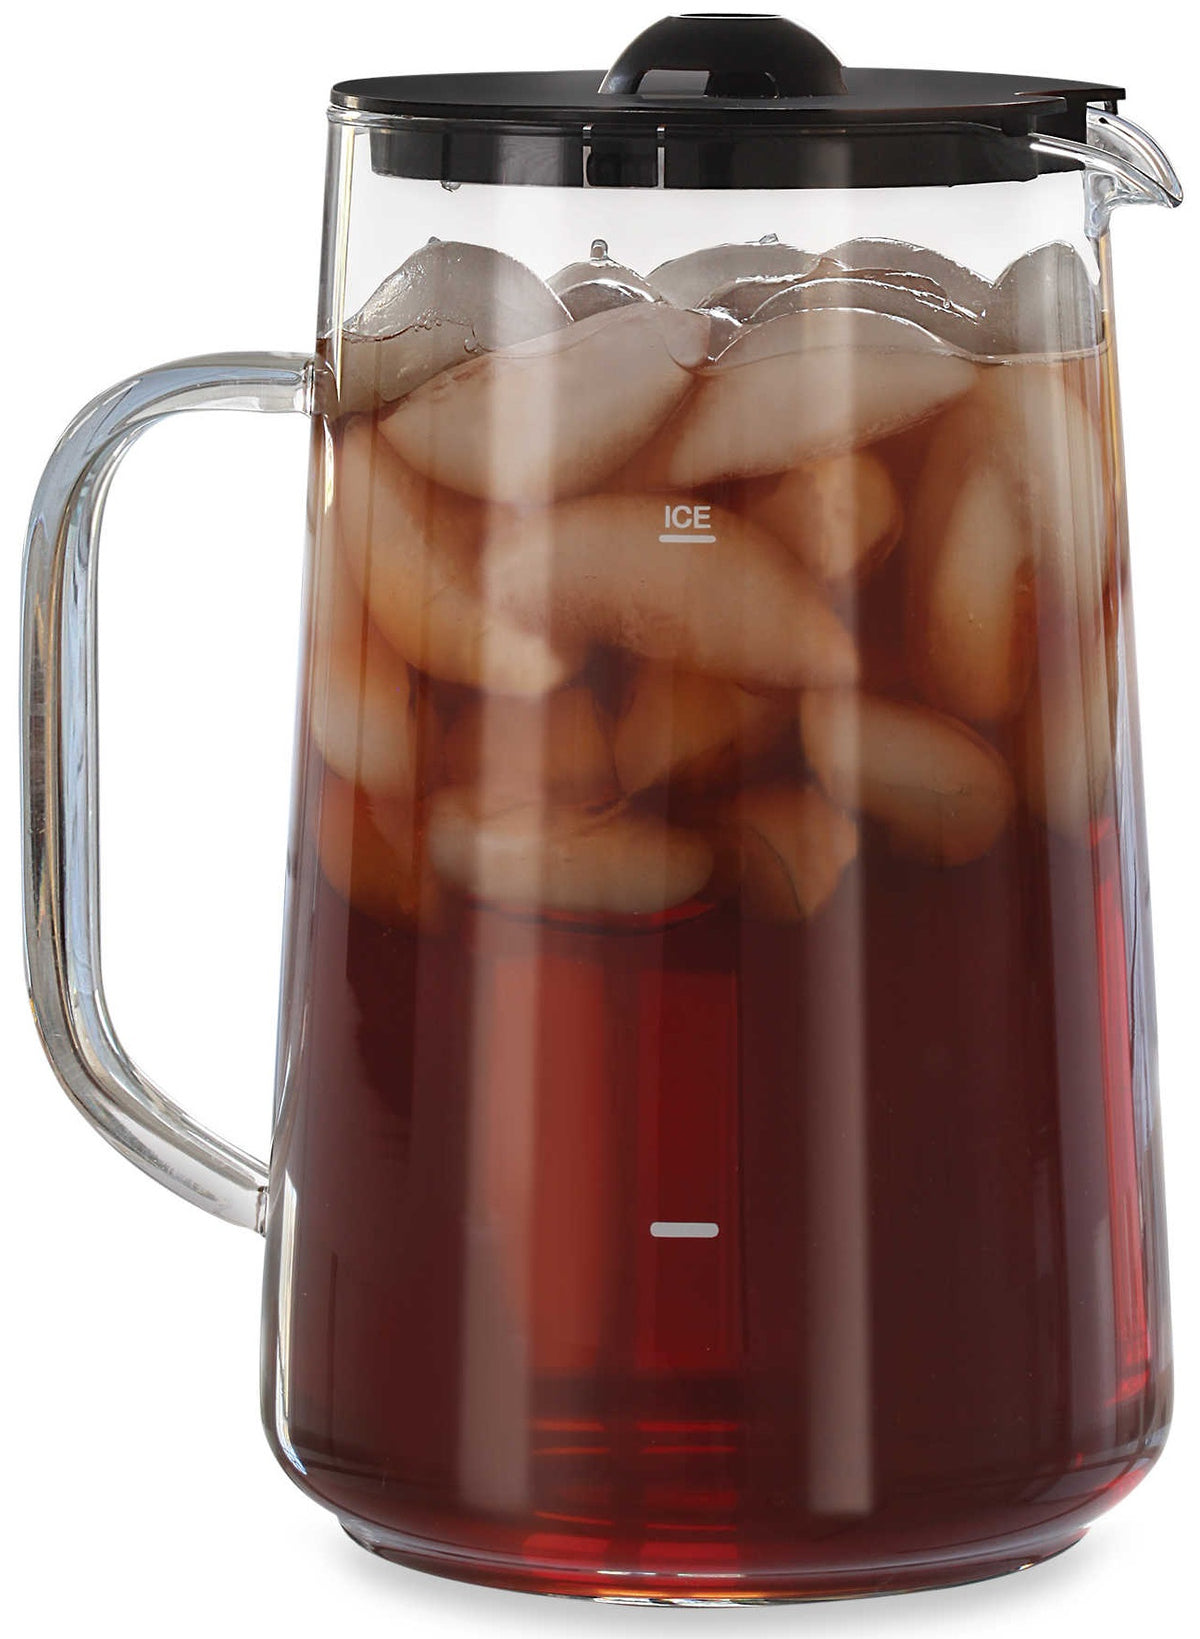 Buy capresso iced tea maker replacement pitcher - Online store for tabletop, carafes & pitchers in USA, on sale, low price, discount deals, coupon code